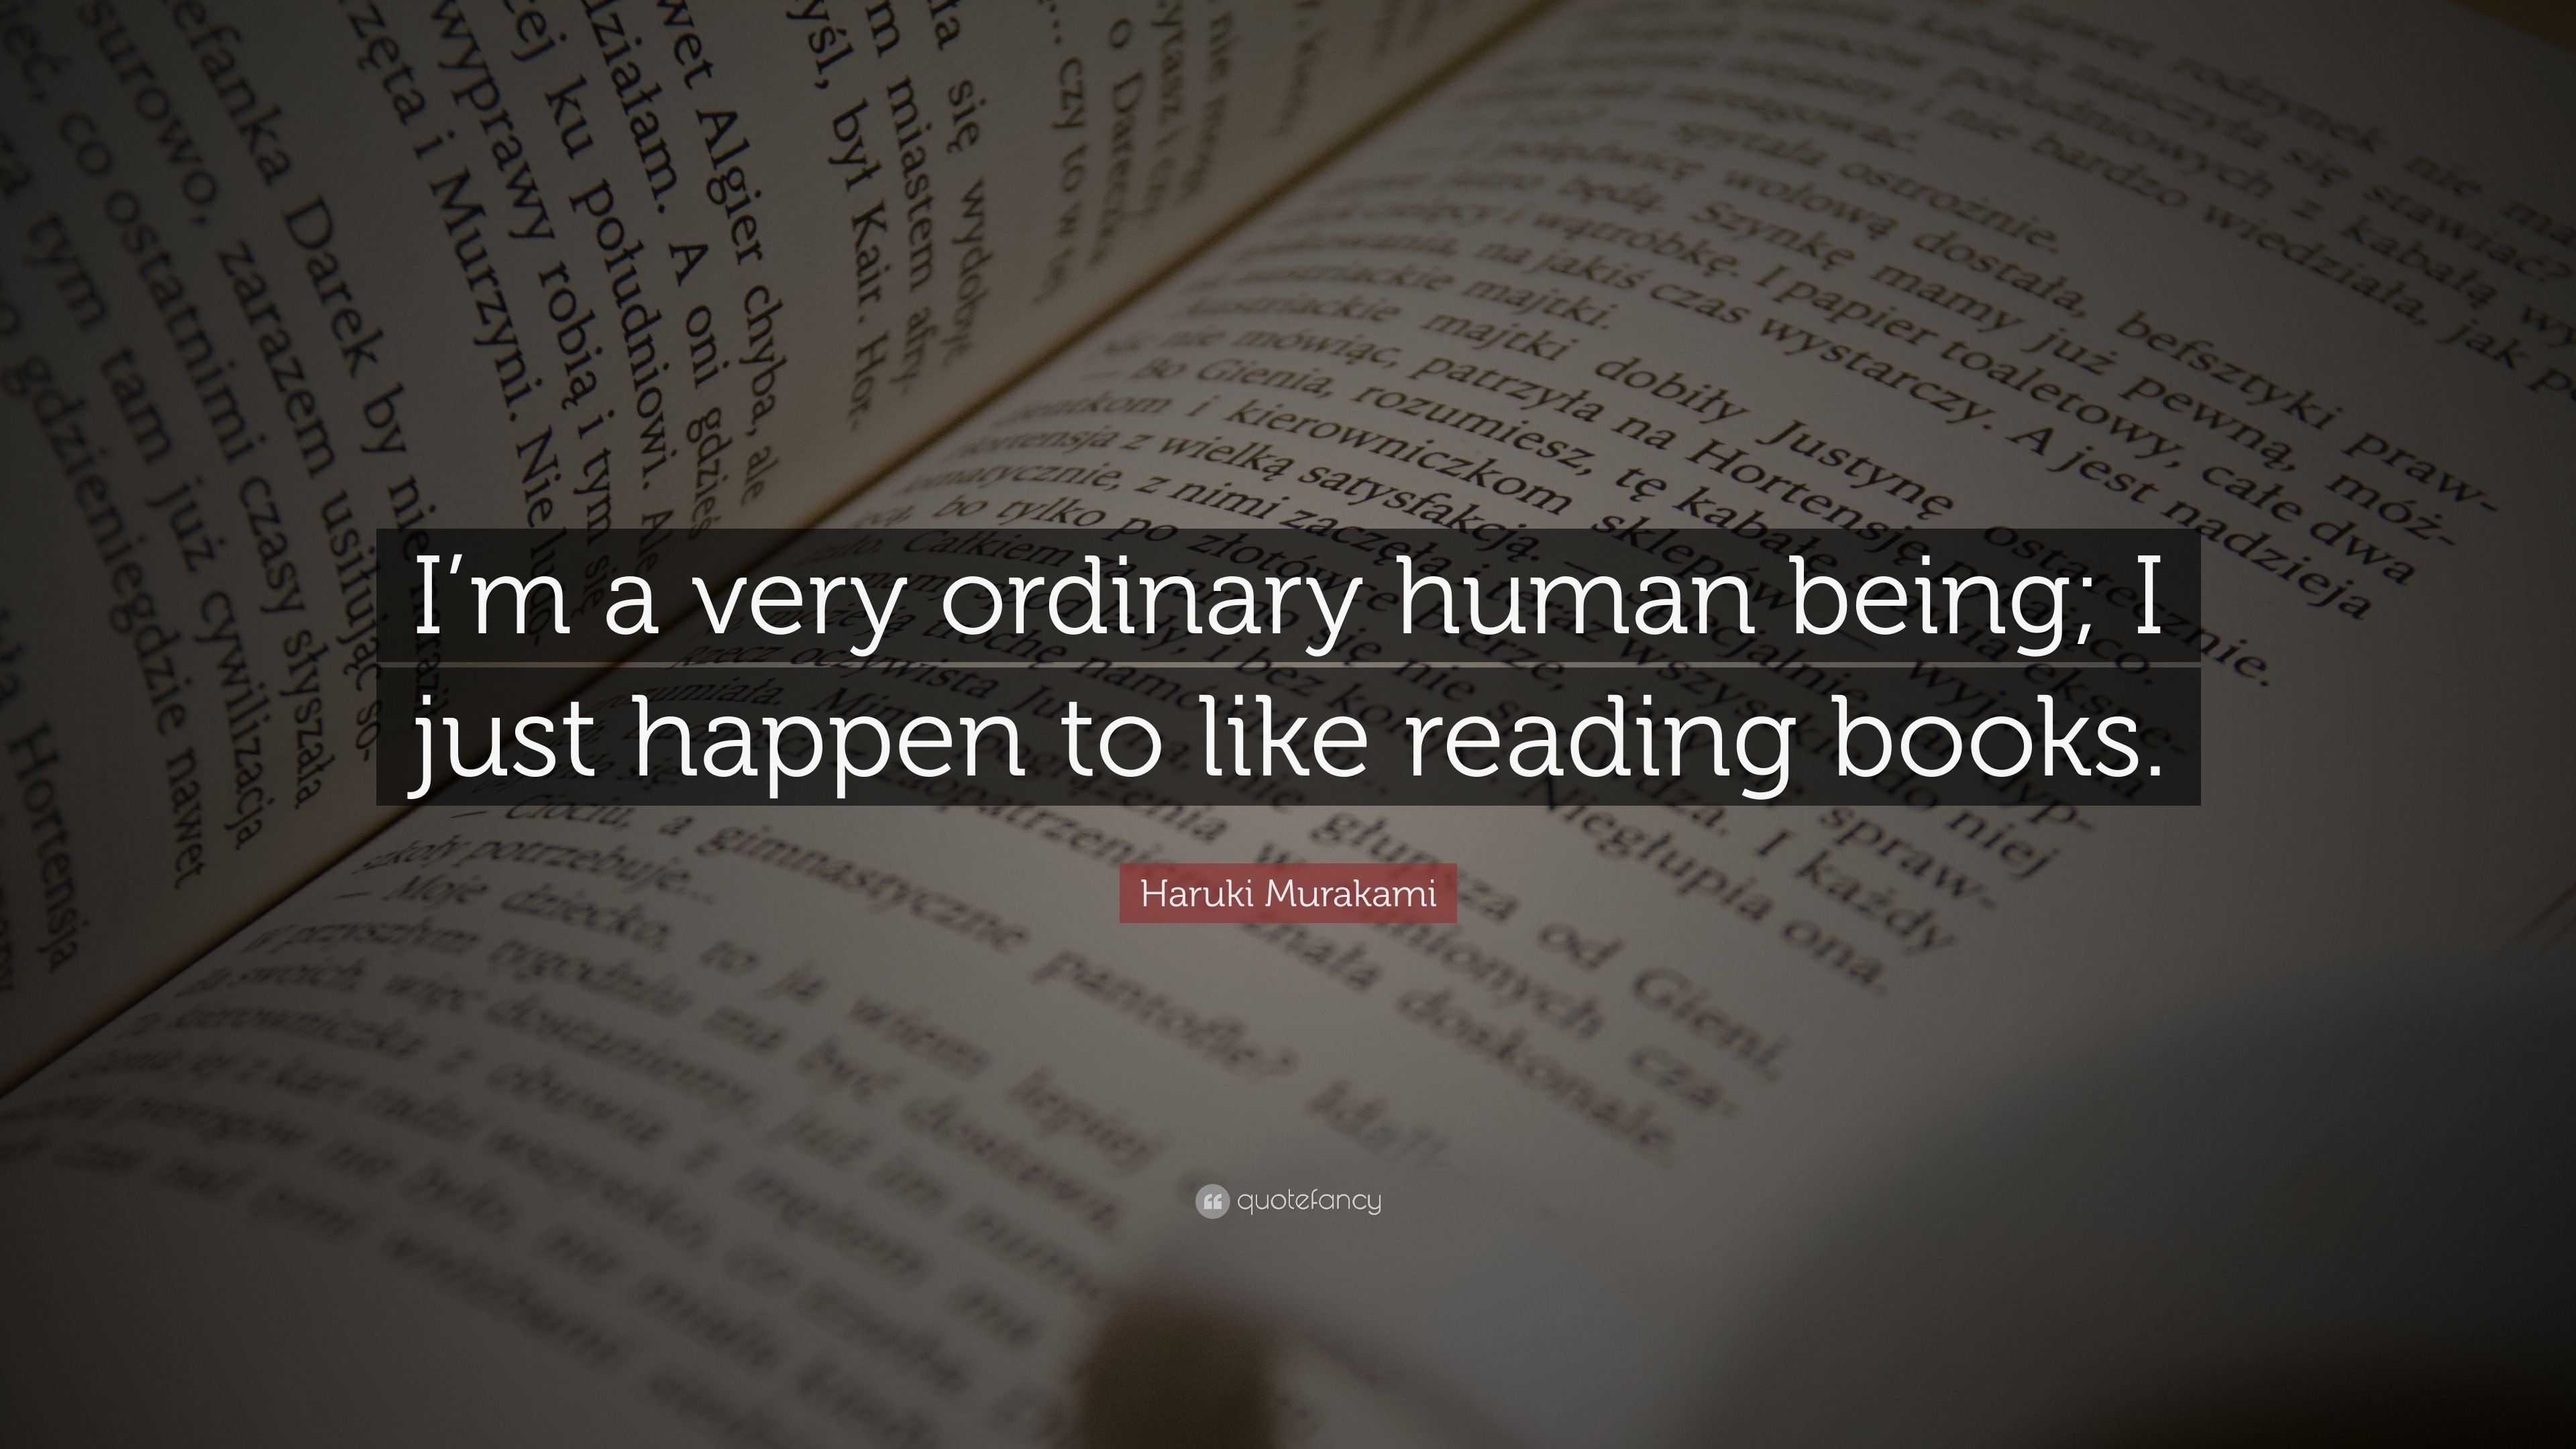 The 22 Best Book Quotes and the Books They Come From